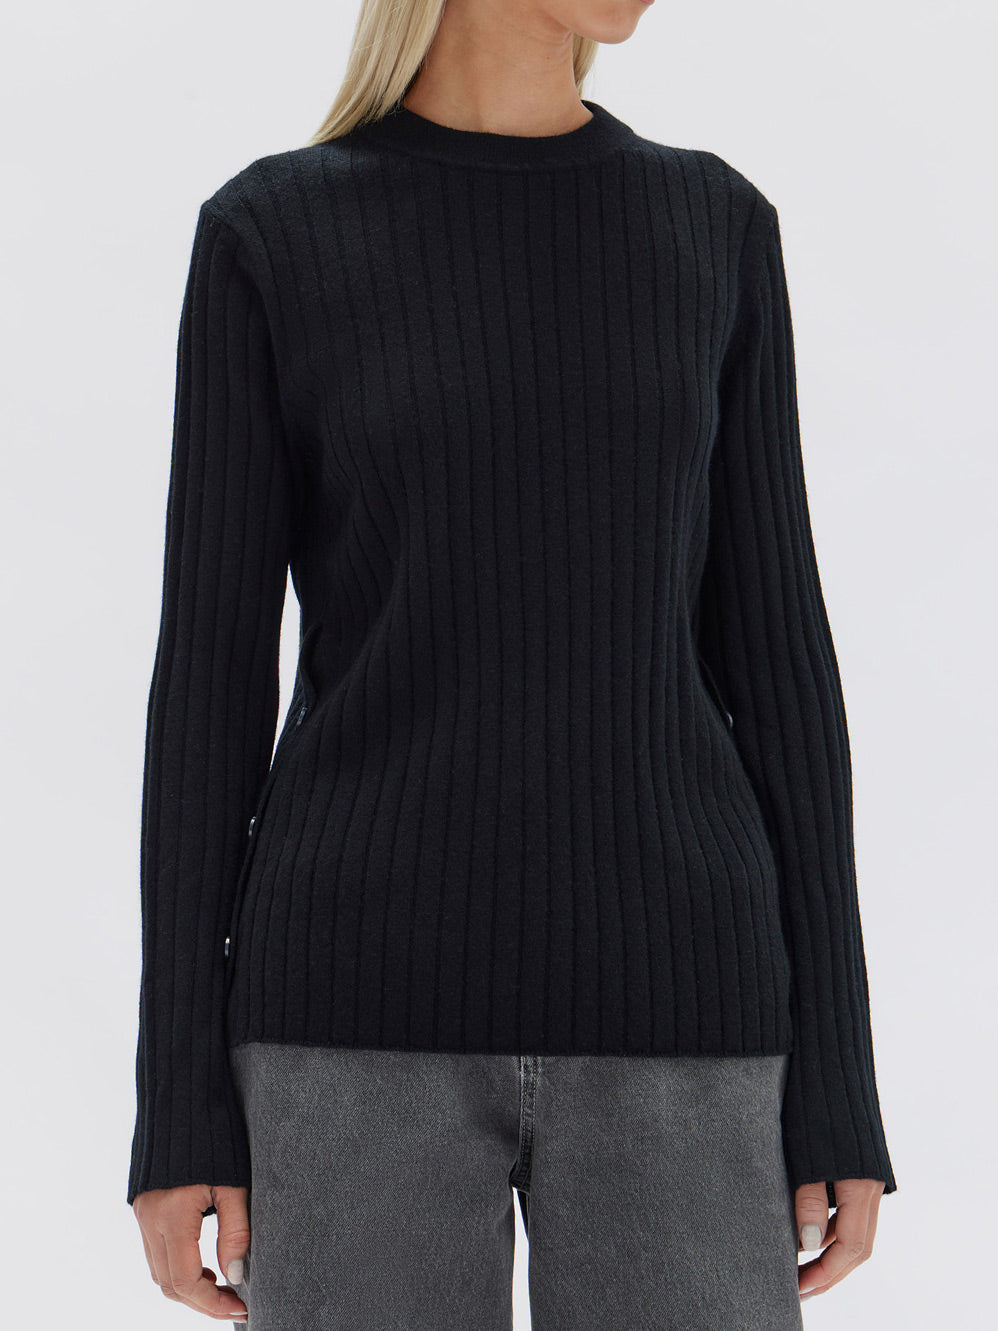 ASSEMBLY LABEL ADRIA WOOL CASHMERE KNIT TOP